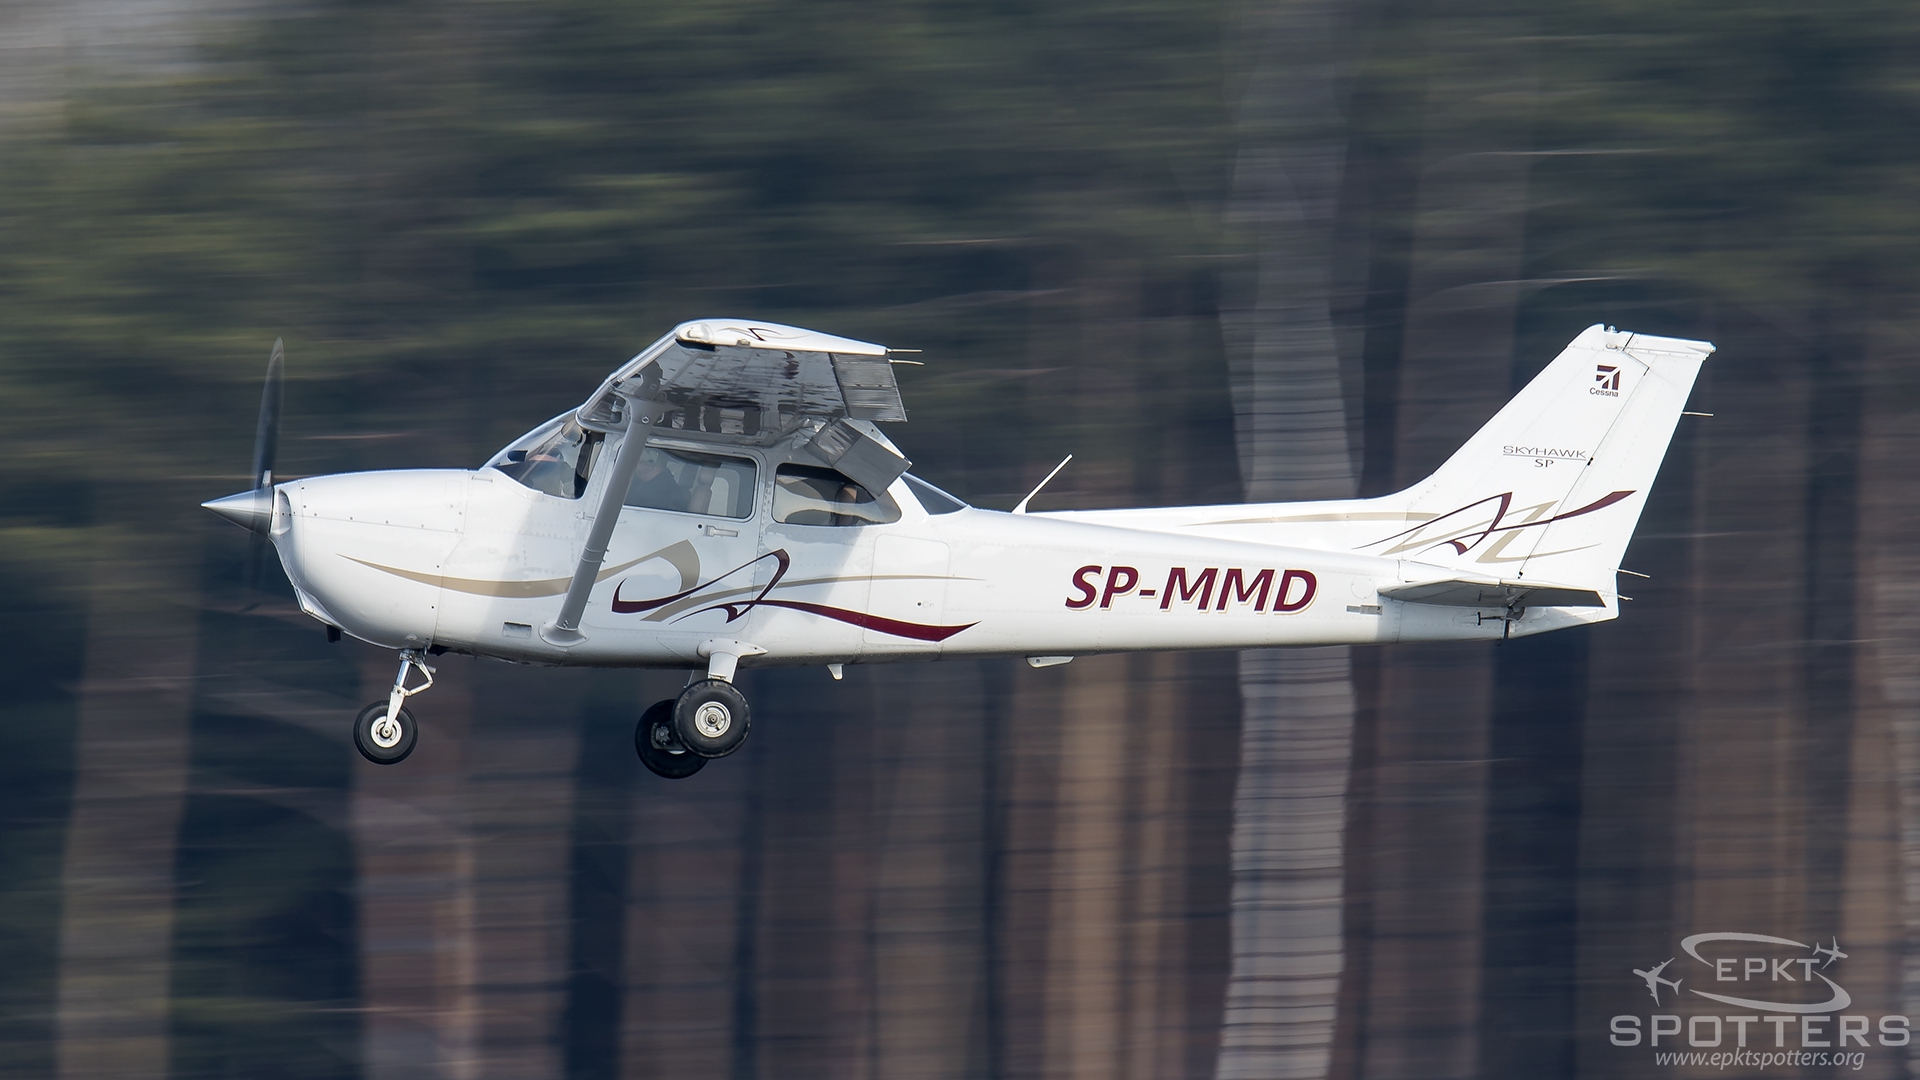 SP-MMD - Cessna 172 Skyhawk SP (Private Owner) / Pyrzowice - Katowice Poland [EPKT/KTW]